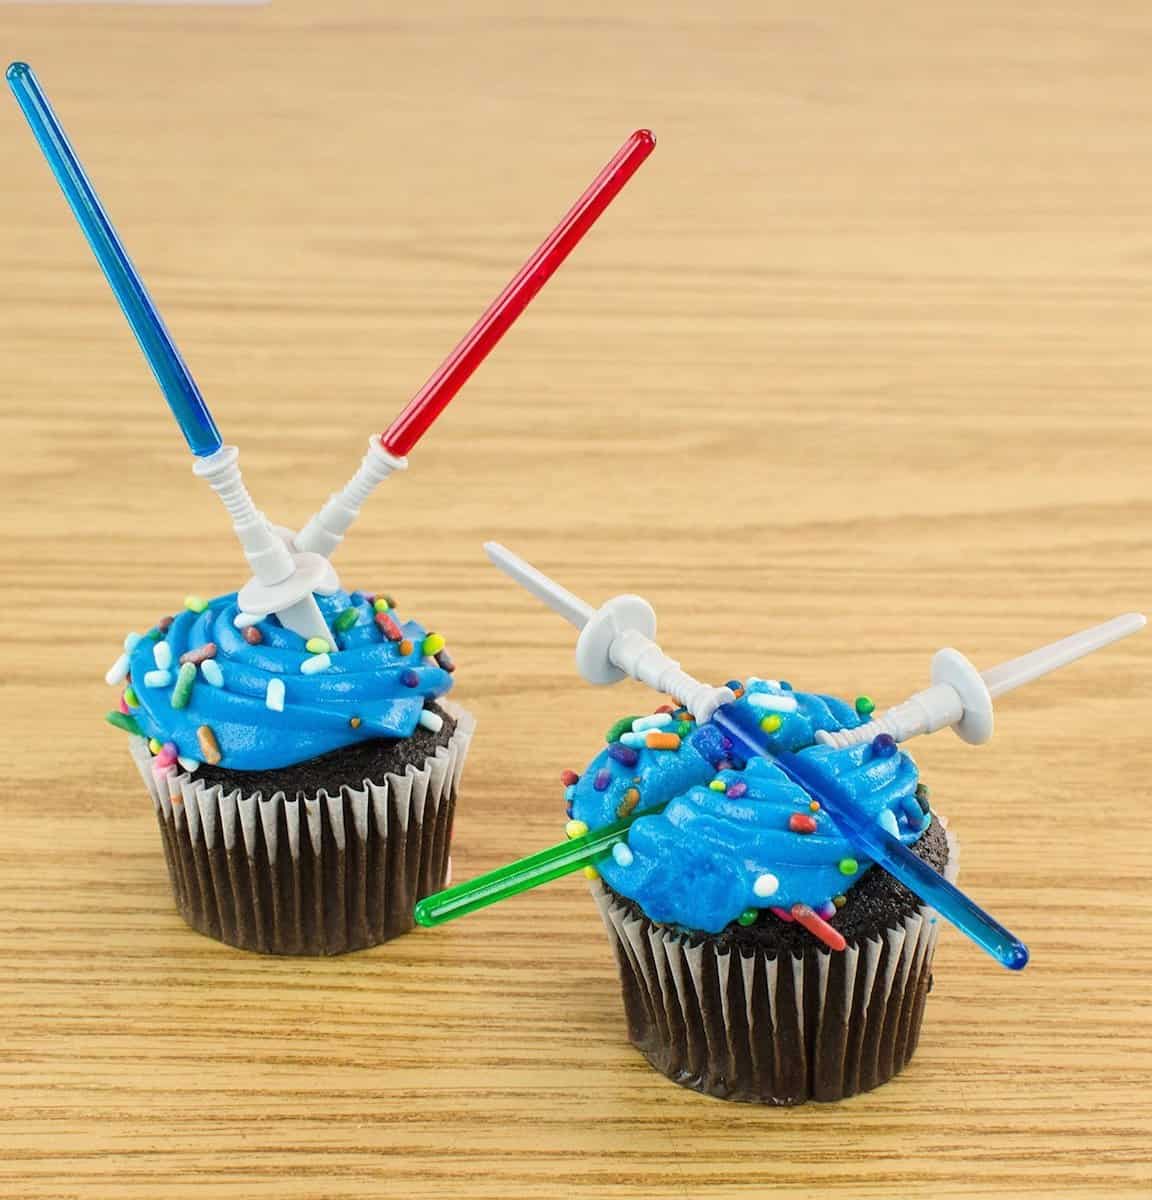 Star Wars party ideas